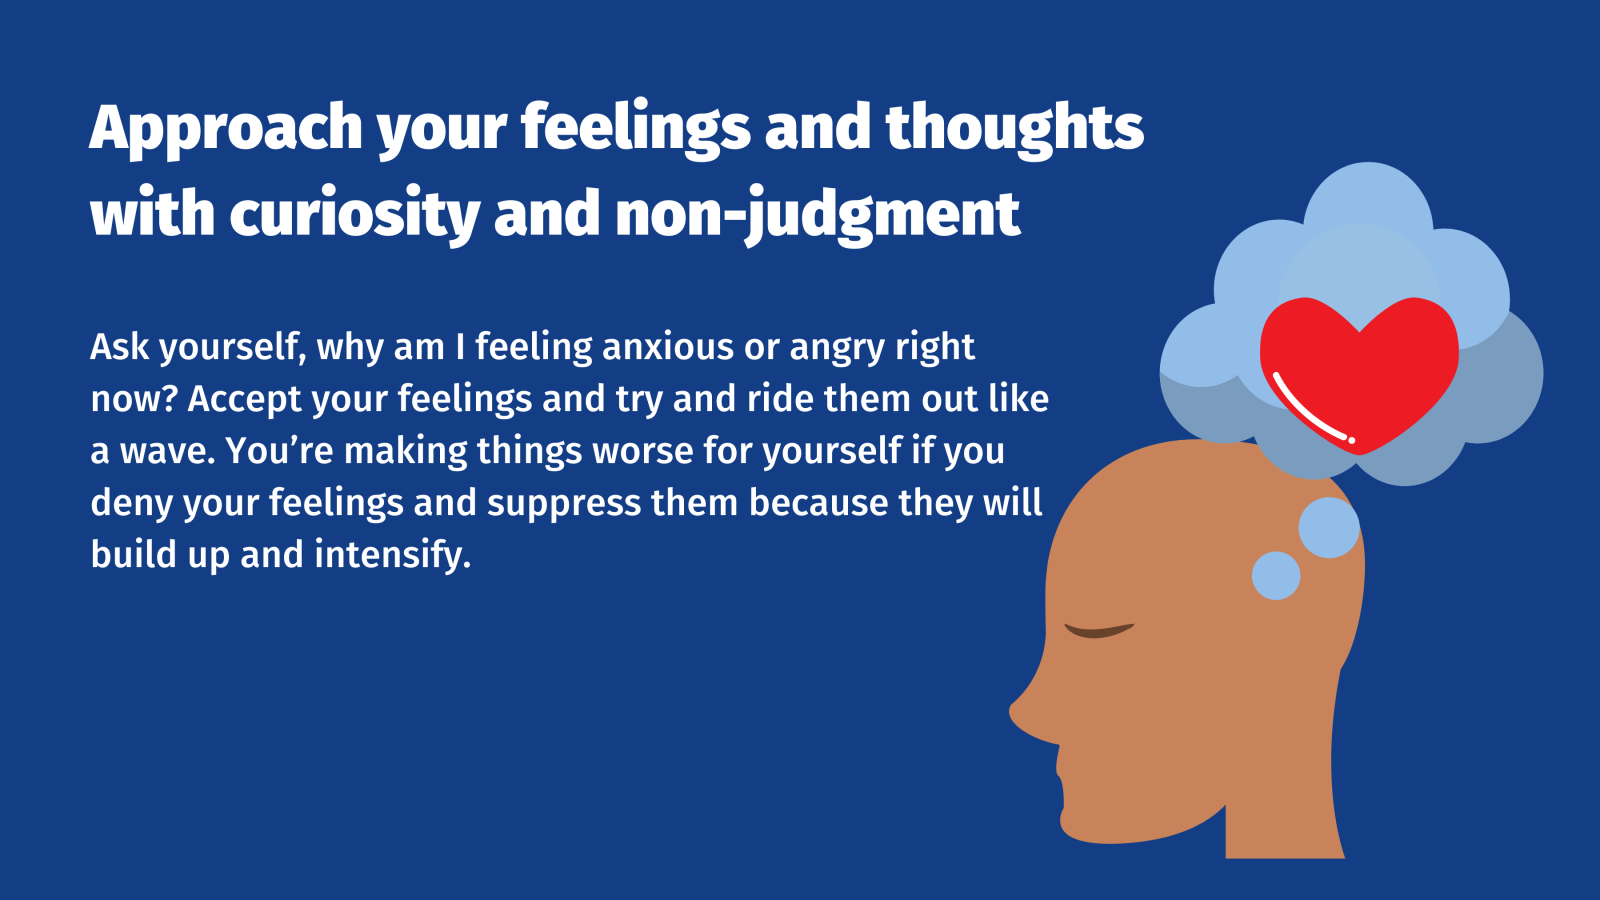 Approach your feelings and thoughts with curiosity and non-judgment poster